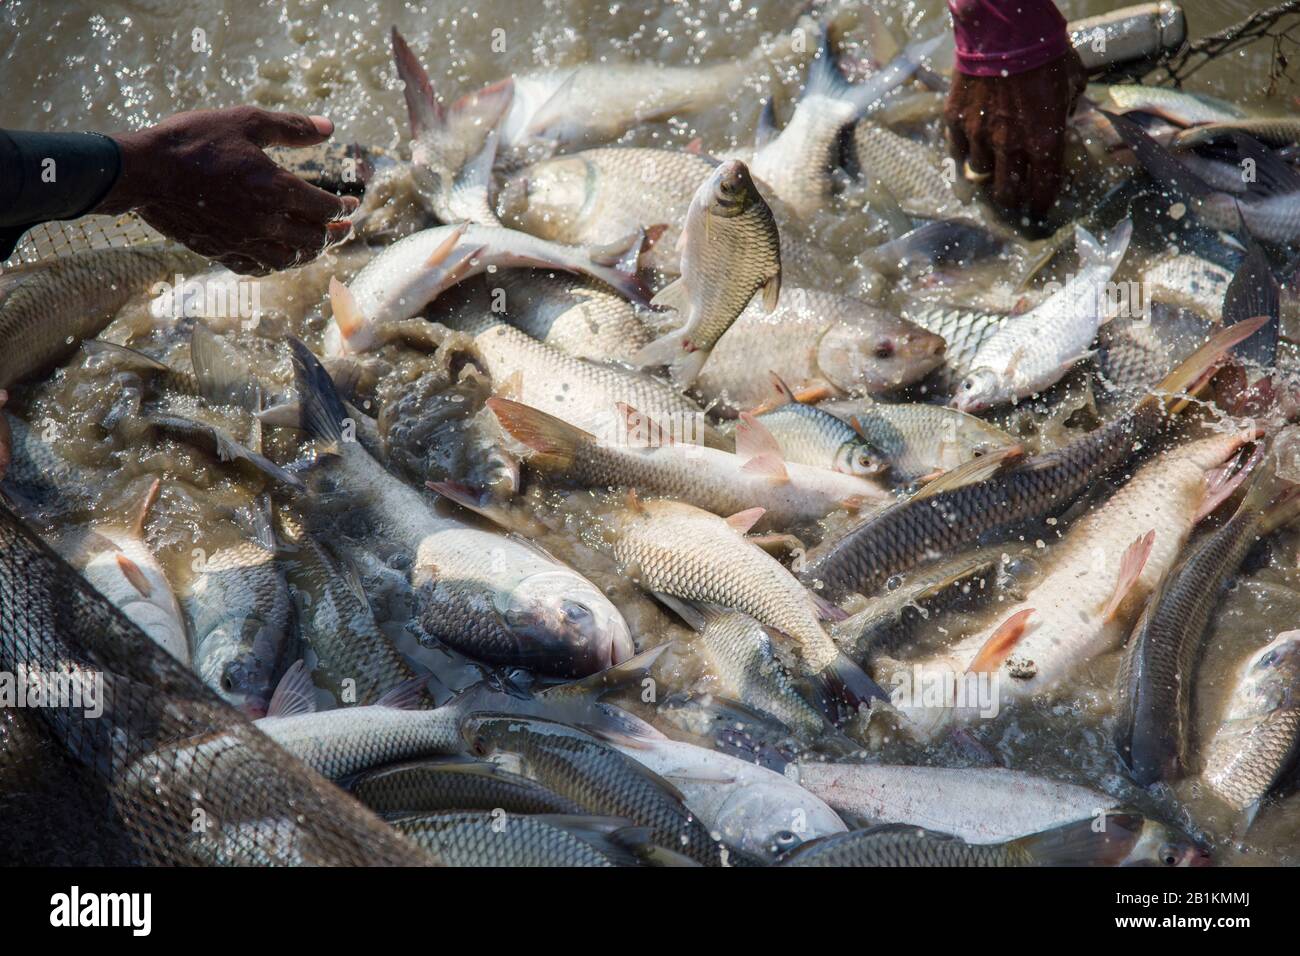 Carp is the fish species which belongs to the family Cyprinidae and native to Asia and Eastern Europe. Fish are jumping during harvesting in the pond. Stock Photo